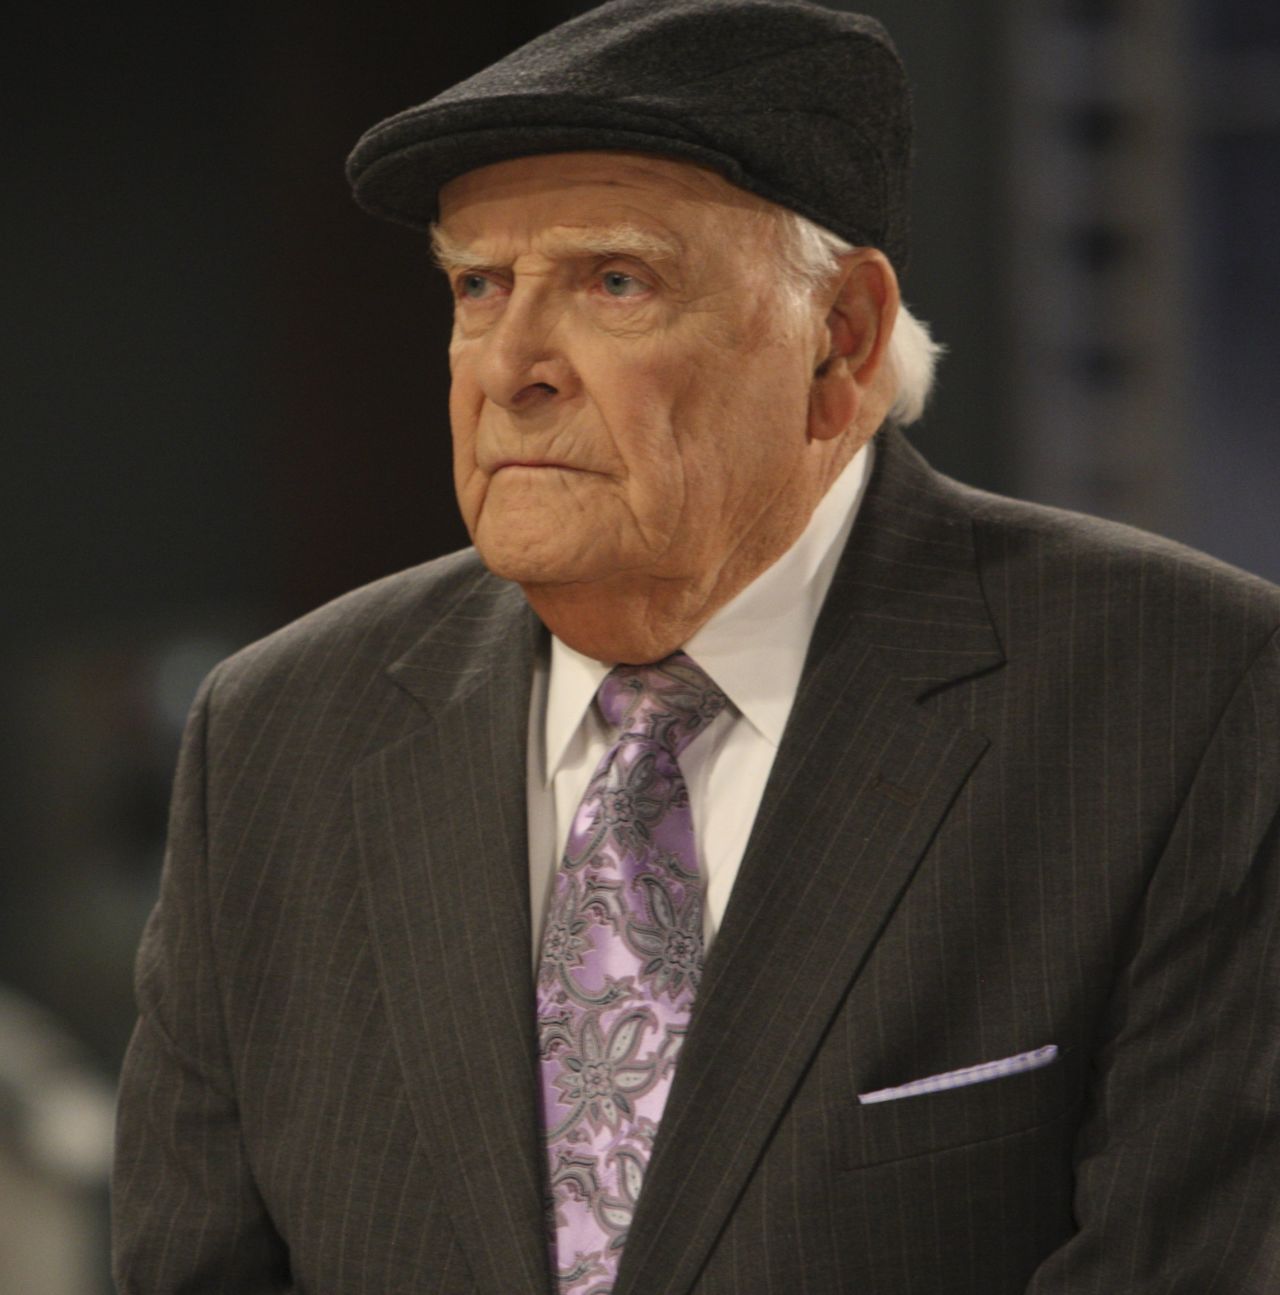 Actor <a href="http://www.cnn.com/2012/09/17/showbiz/general-hospital-actor-obit/index.html">John Ingle</a>, who played patriarch Edward Quartermaine on ABC's "General Hospital," died September 15 at age 84.